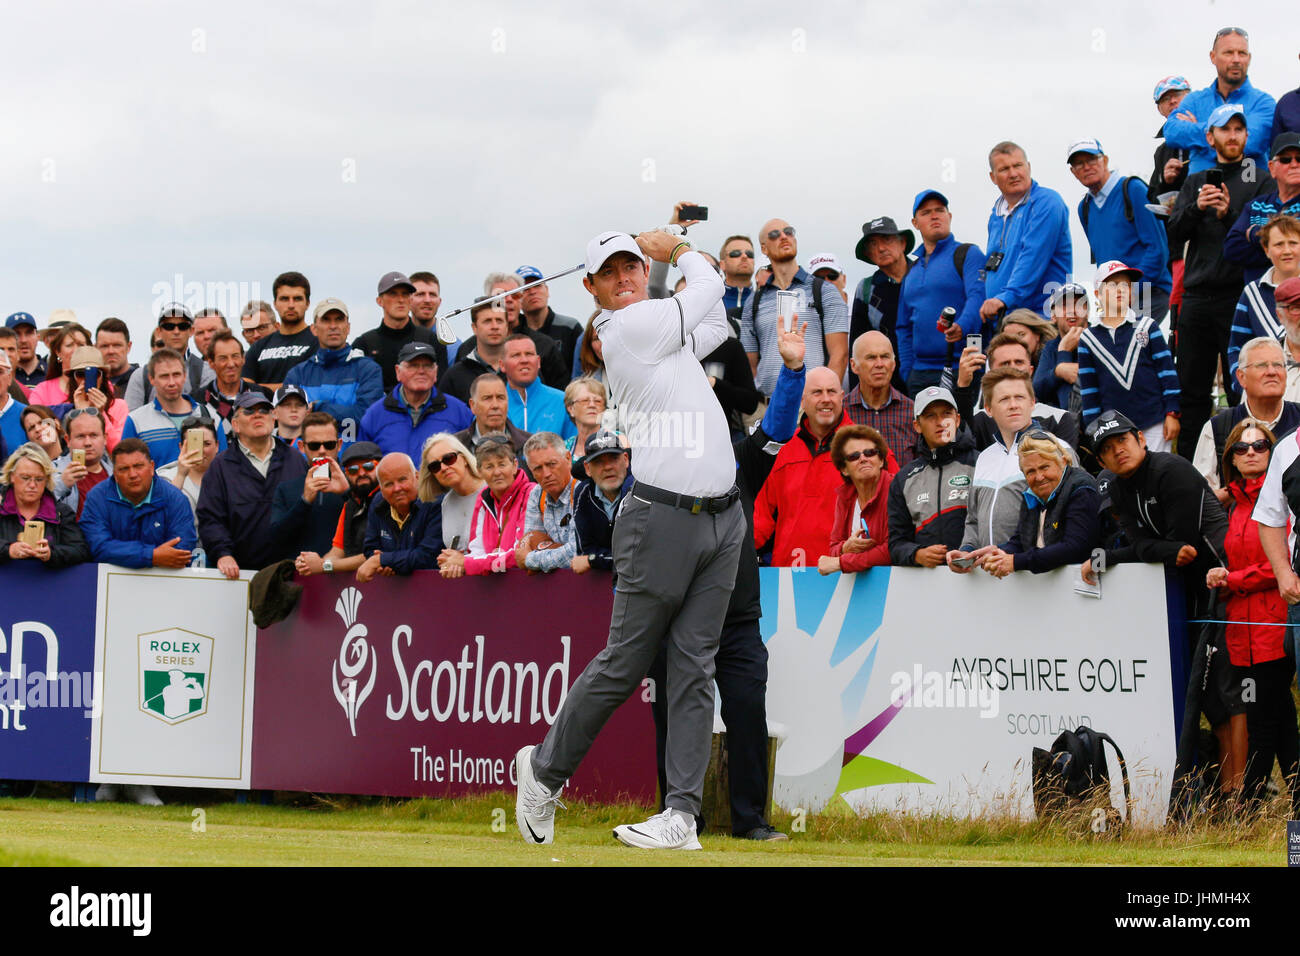 Irvine, Ayrshire, Scotland, UK. 14th July, 2017. On the second day of the Scottish Open, players were hoping to play well and make the cut. After the calm weather on the first day some players were finding the conditions of strong winds and links style golf difficult while others played better than on the first round. Credit: Findlay/Alamy Live News Stock Photo